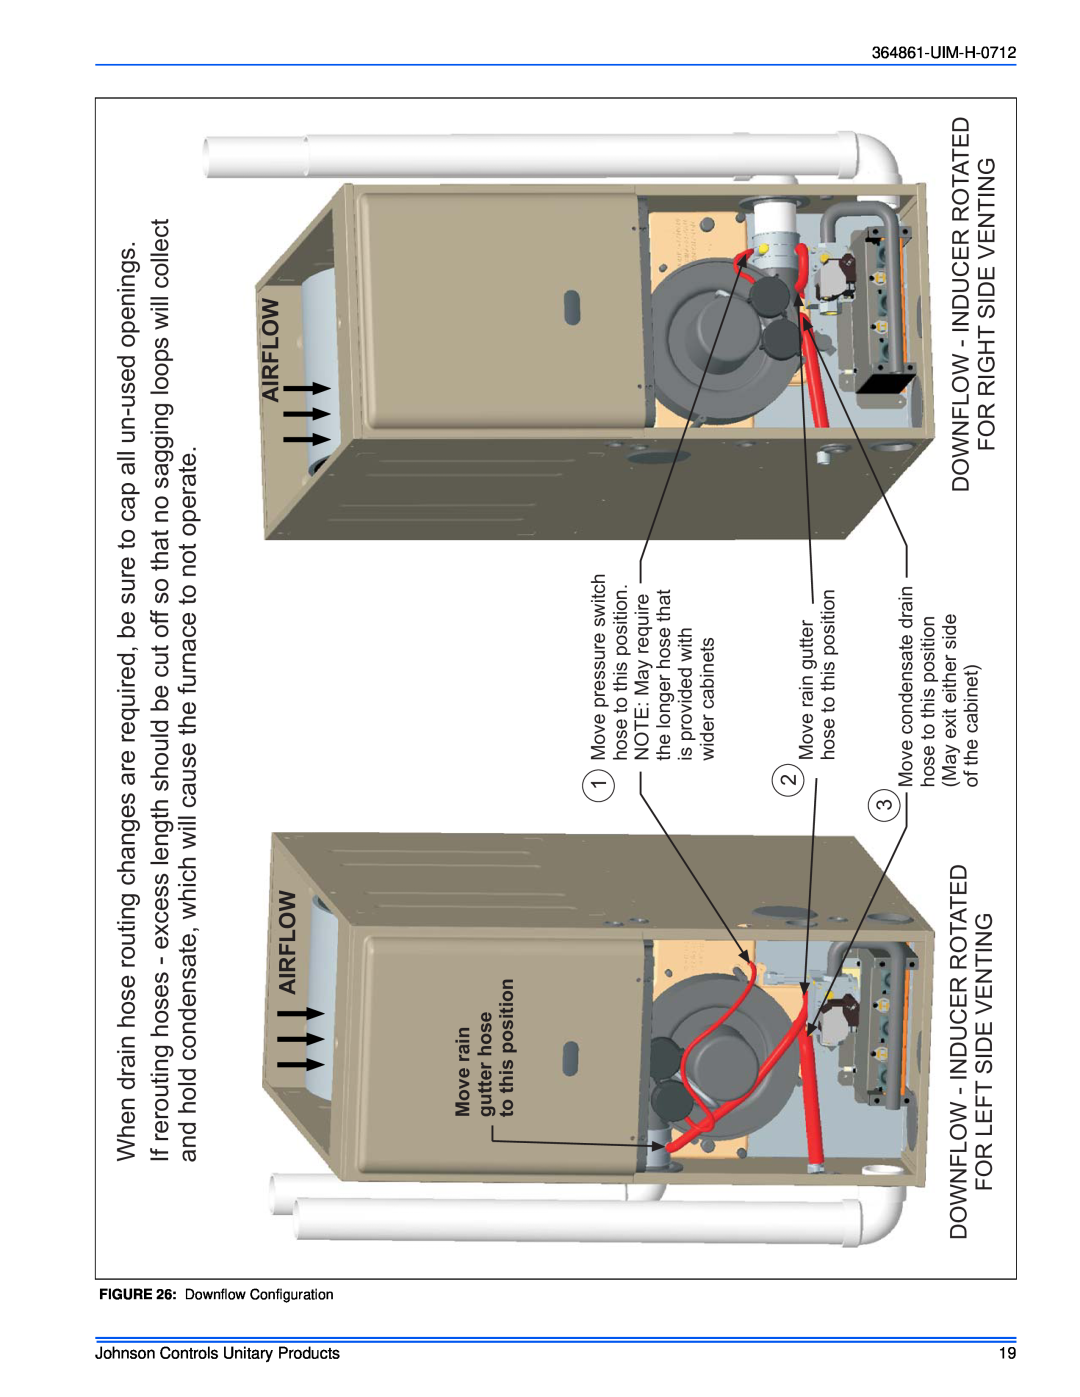 Johnson Controls GG9S'MP, TG9S'MP installation manual Airflow Airflow, Downflow - Inducer Rotated For Left Side Venting 